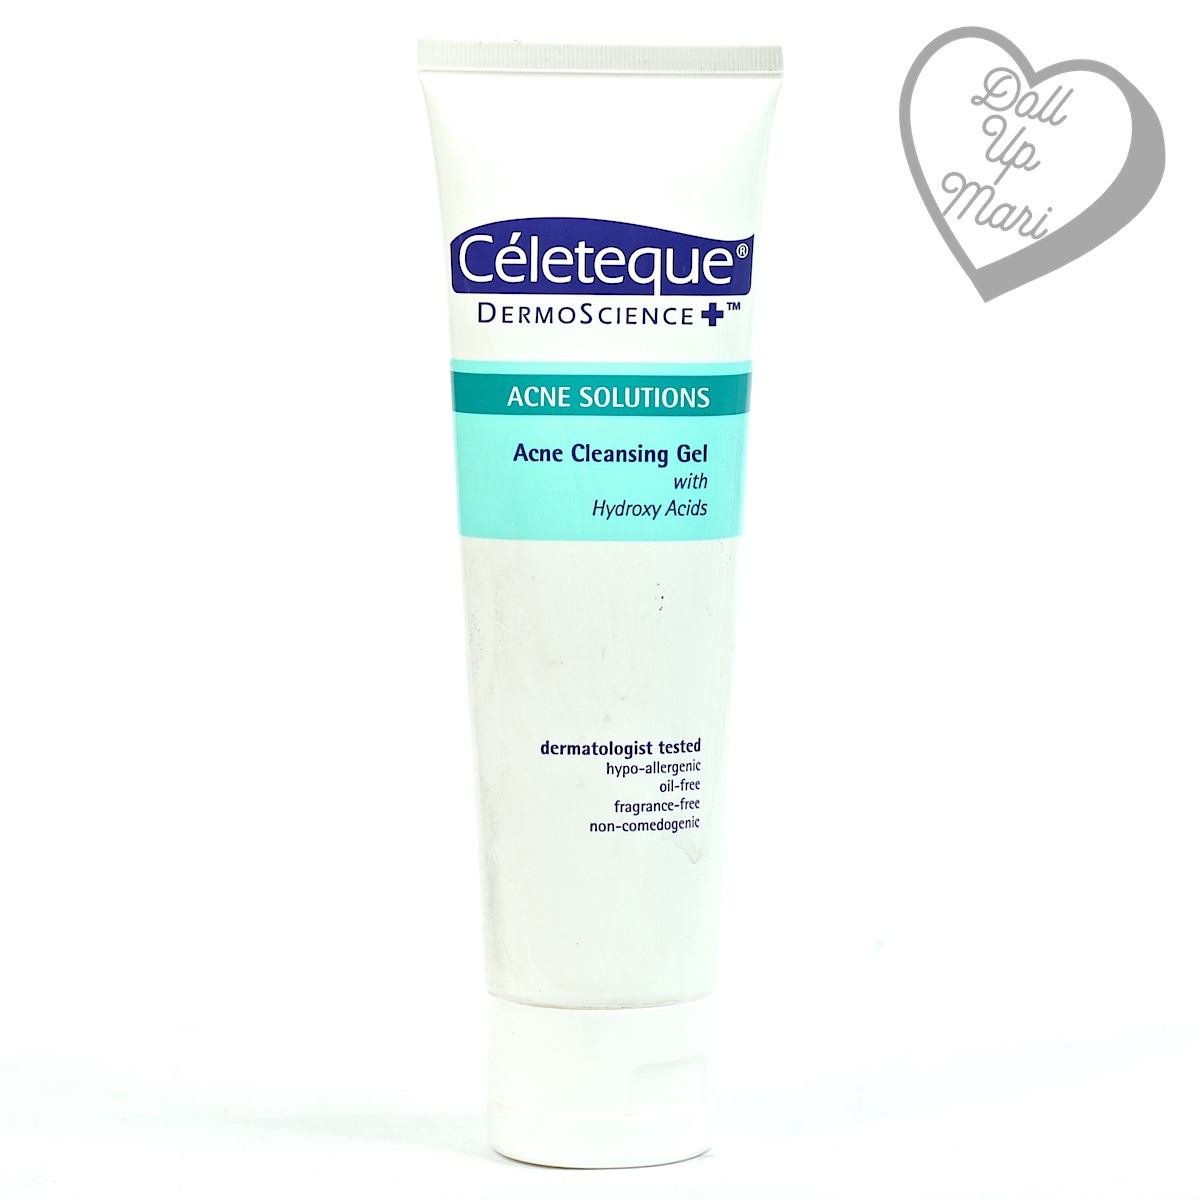 pack shot of Céleteque Acne Cleansing Gel